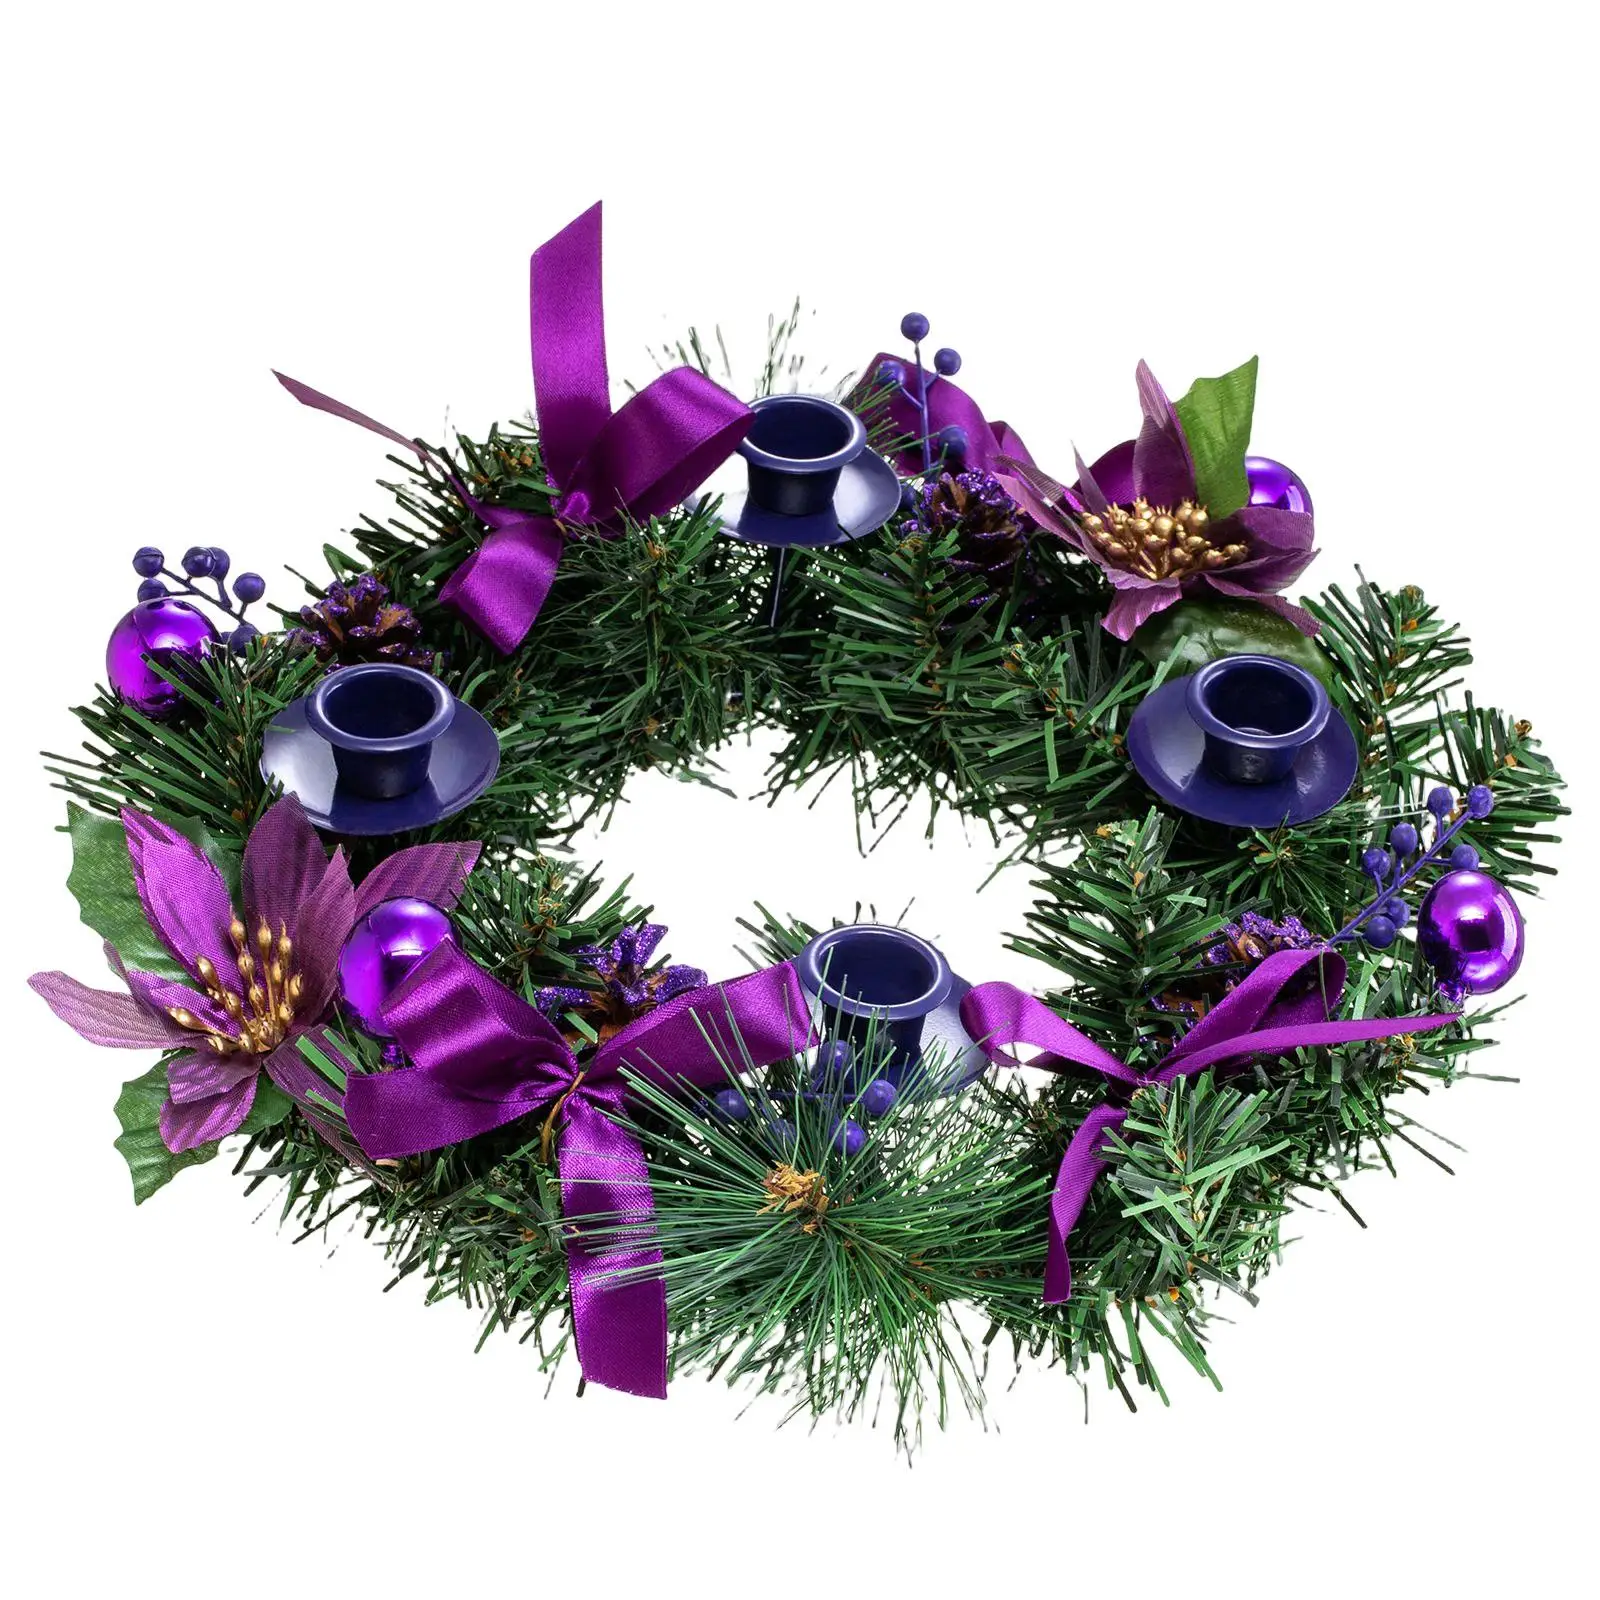 Modern Creative Garland Ornaments Decoration Centerpiece Wall Hanging Flower Wreath for Window Farmhouse Holiday Banquet Table